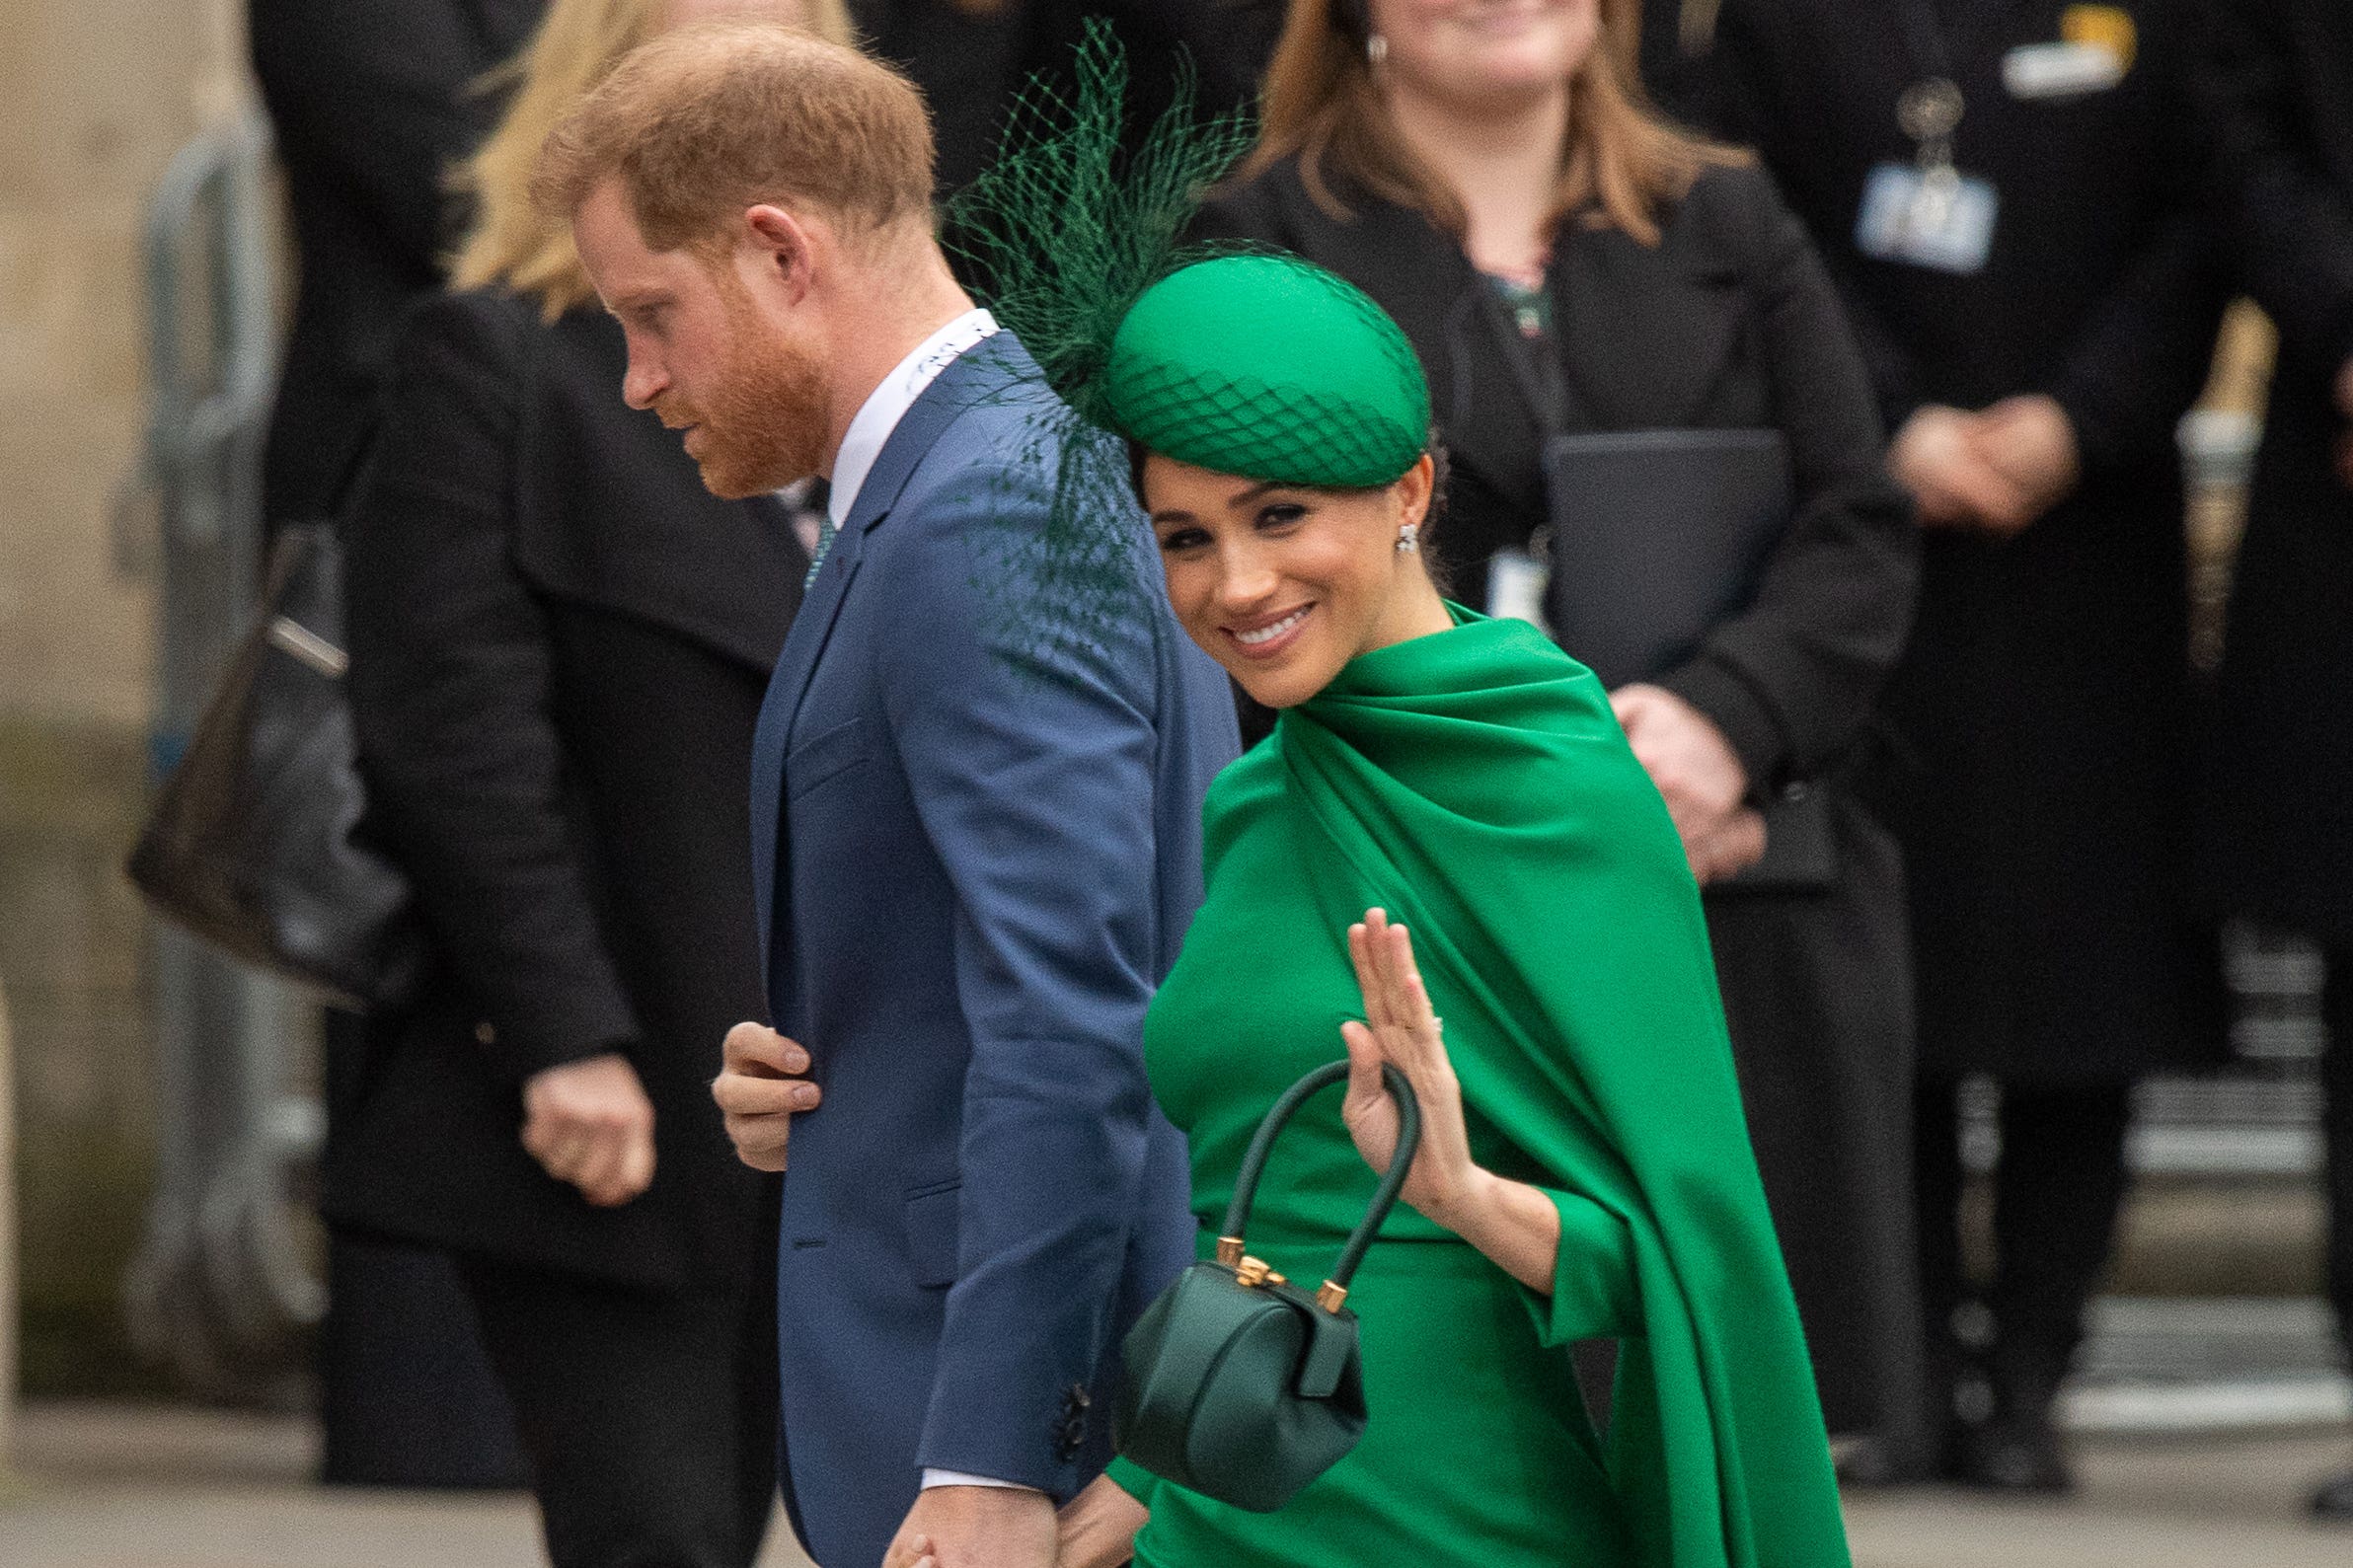 Meghan wore a bold green dress for her last royal appearance in the farewell tour